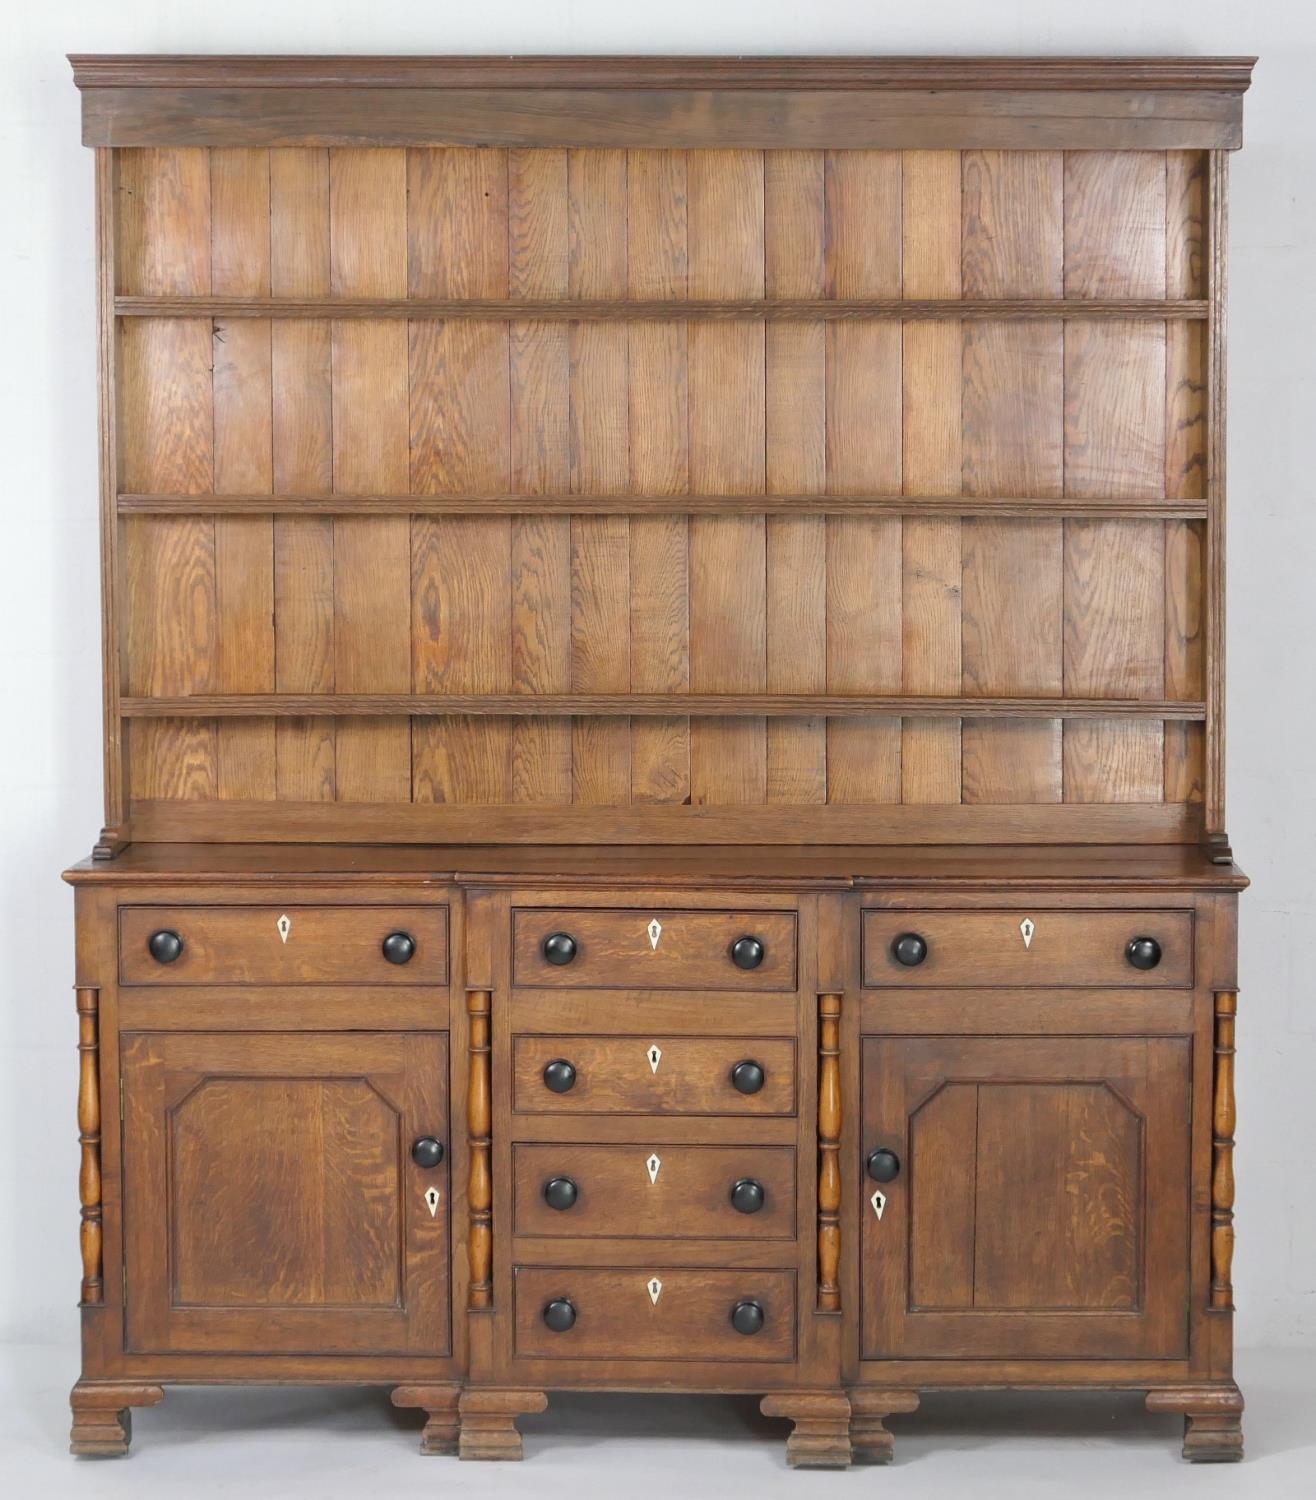 Montgomery oak enclosed dresser, circa 1820-40, with later plate rack, having three shelves over a